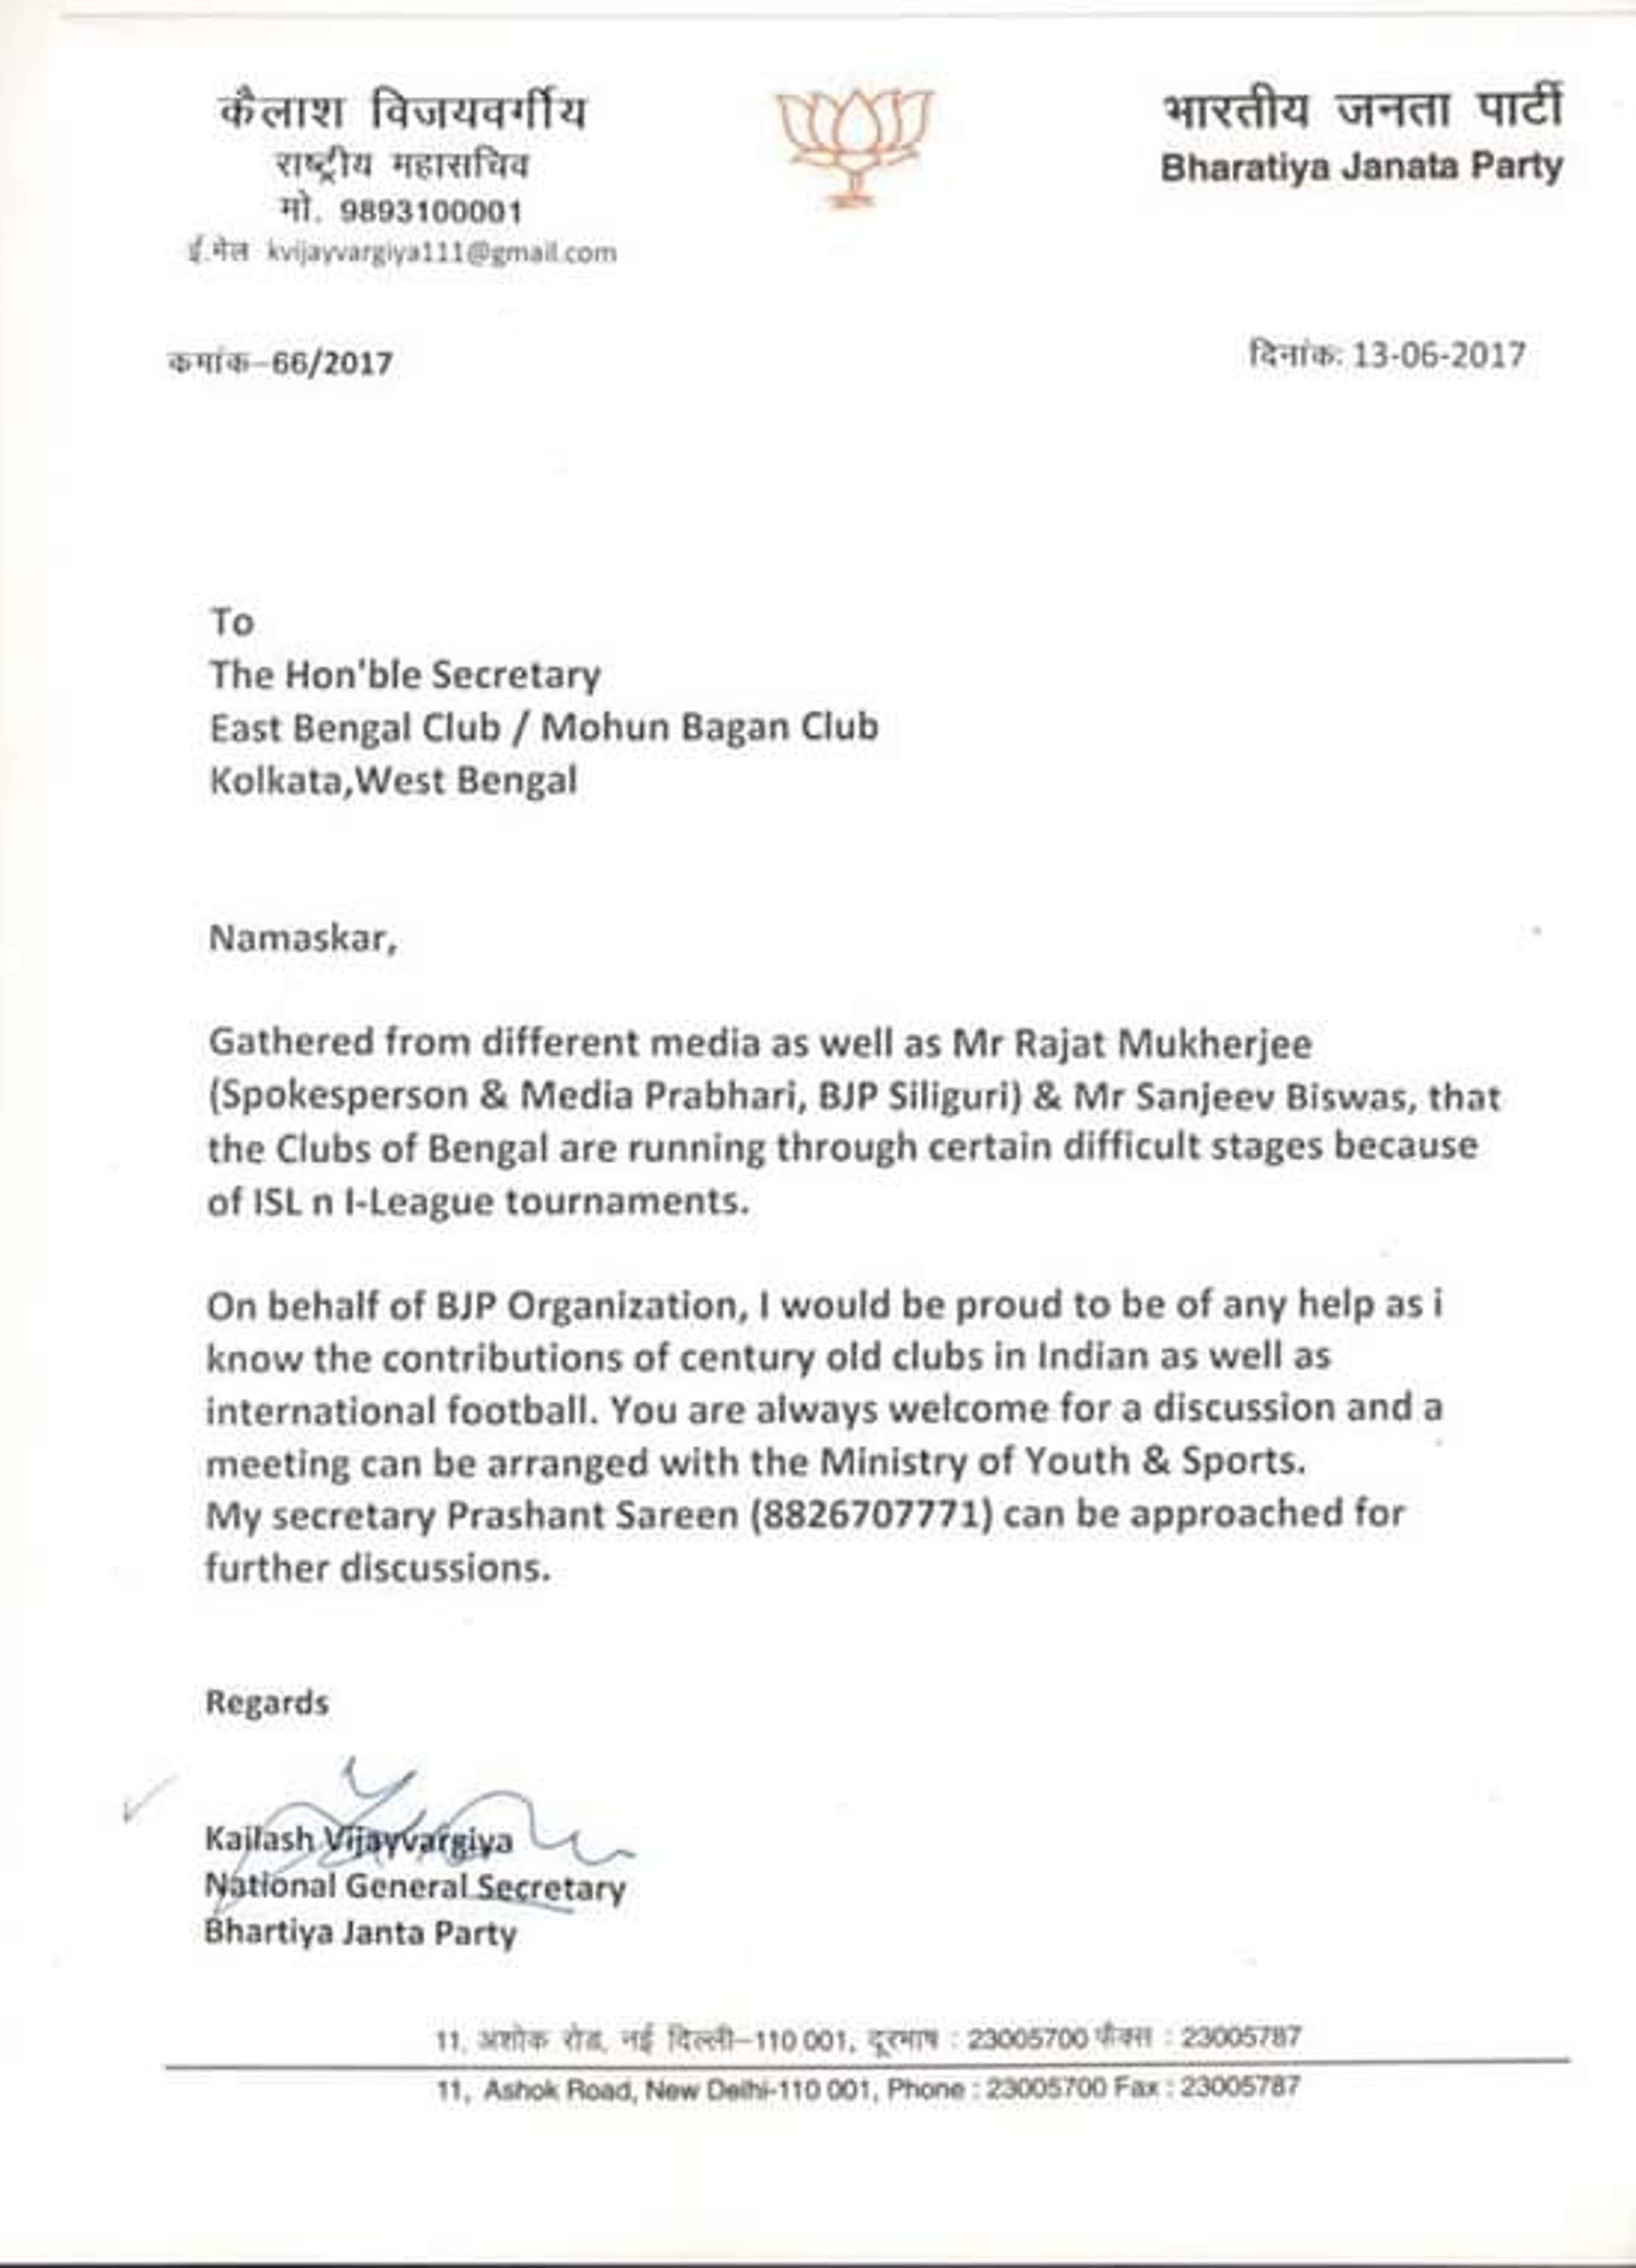 BJP letter to EB and MB